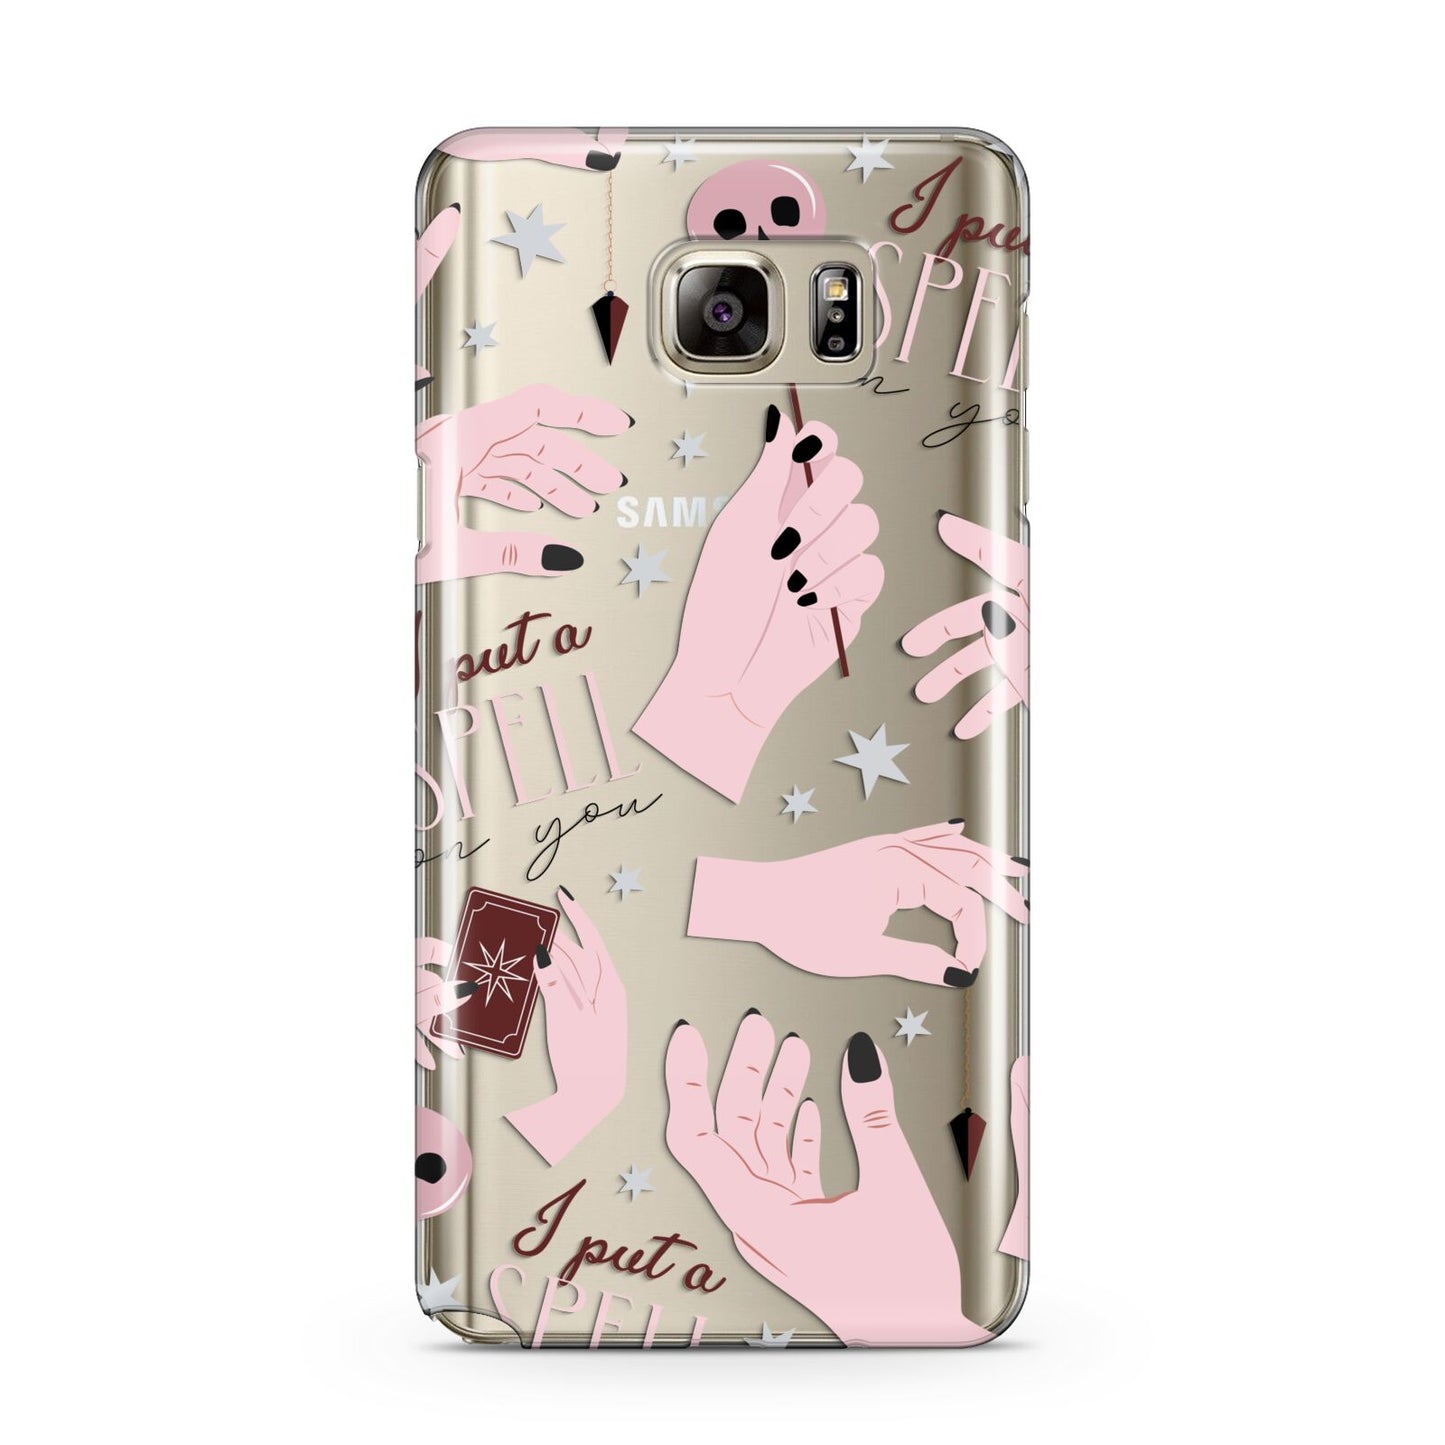 Witches Hands and Tarot Cards Samsung Galaxy Note 5 Case